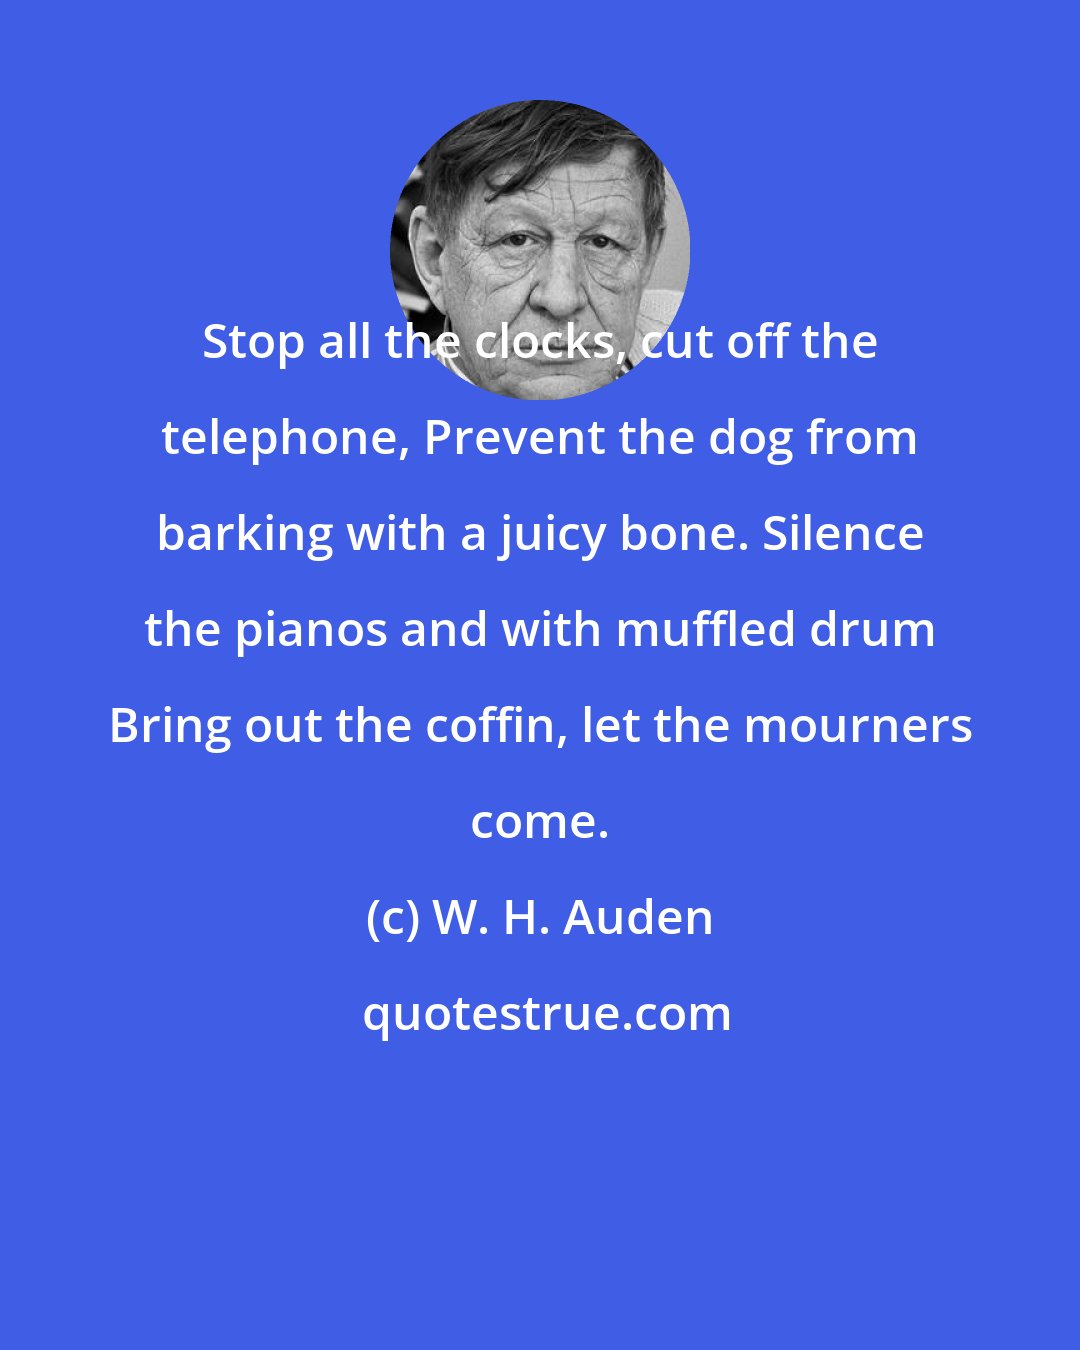 W. H. Auden: Stop all the clocks, cut off the telephone, Prevent the dog from barking with a juicy bone. Silence the pianos and with muffled drum Bring out the coffin, let the mourners come.